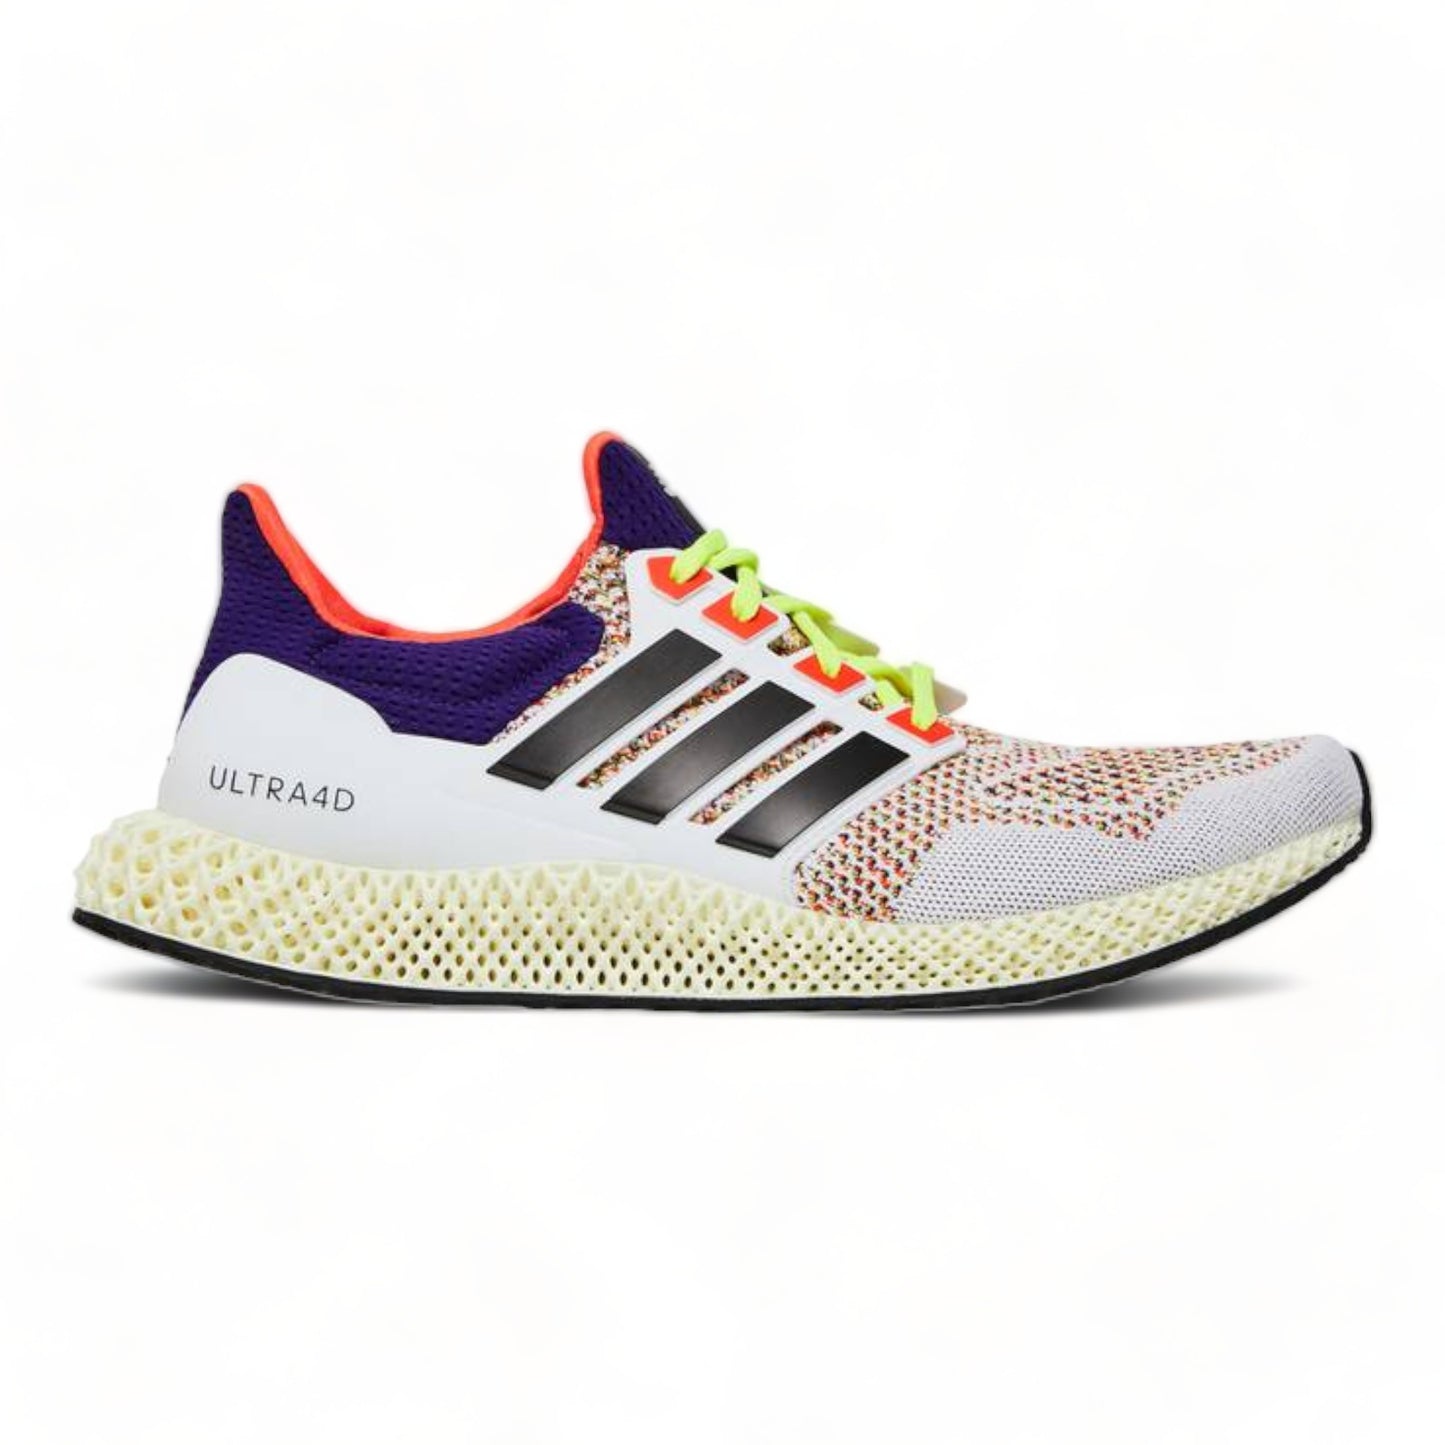 ADIDAS ULTRA 4D 'WHITE SOLAR RED'